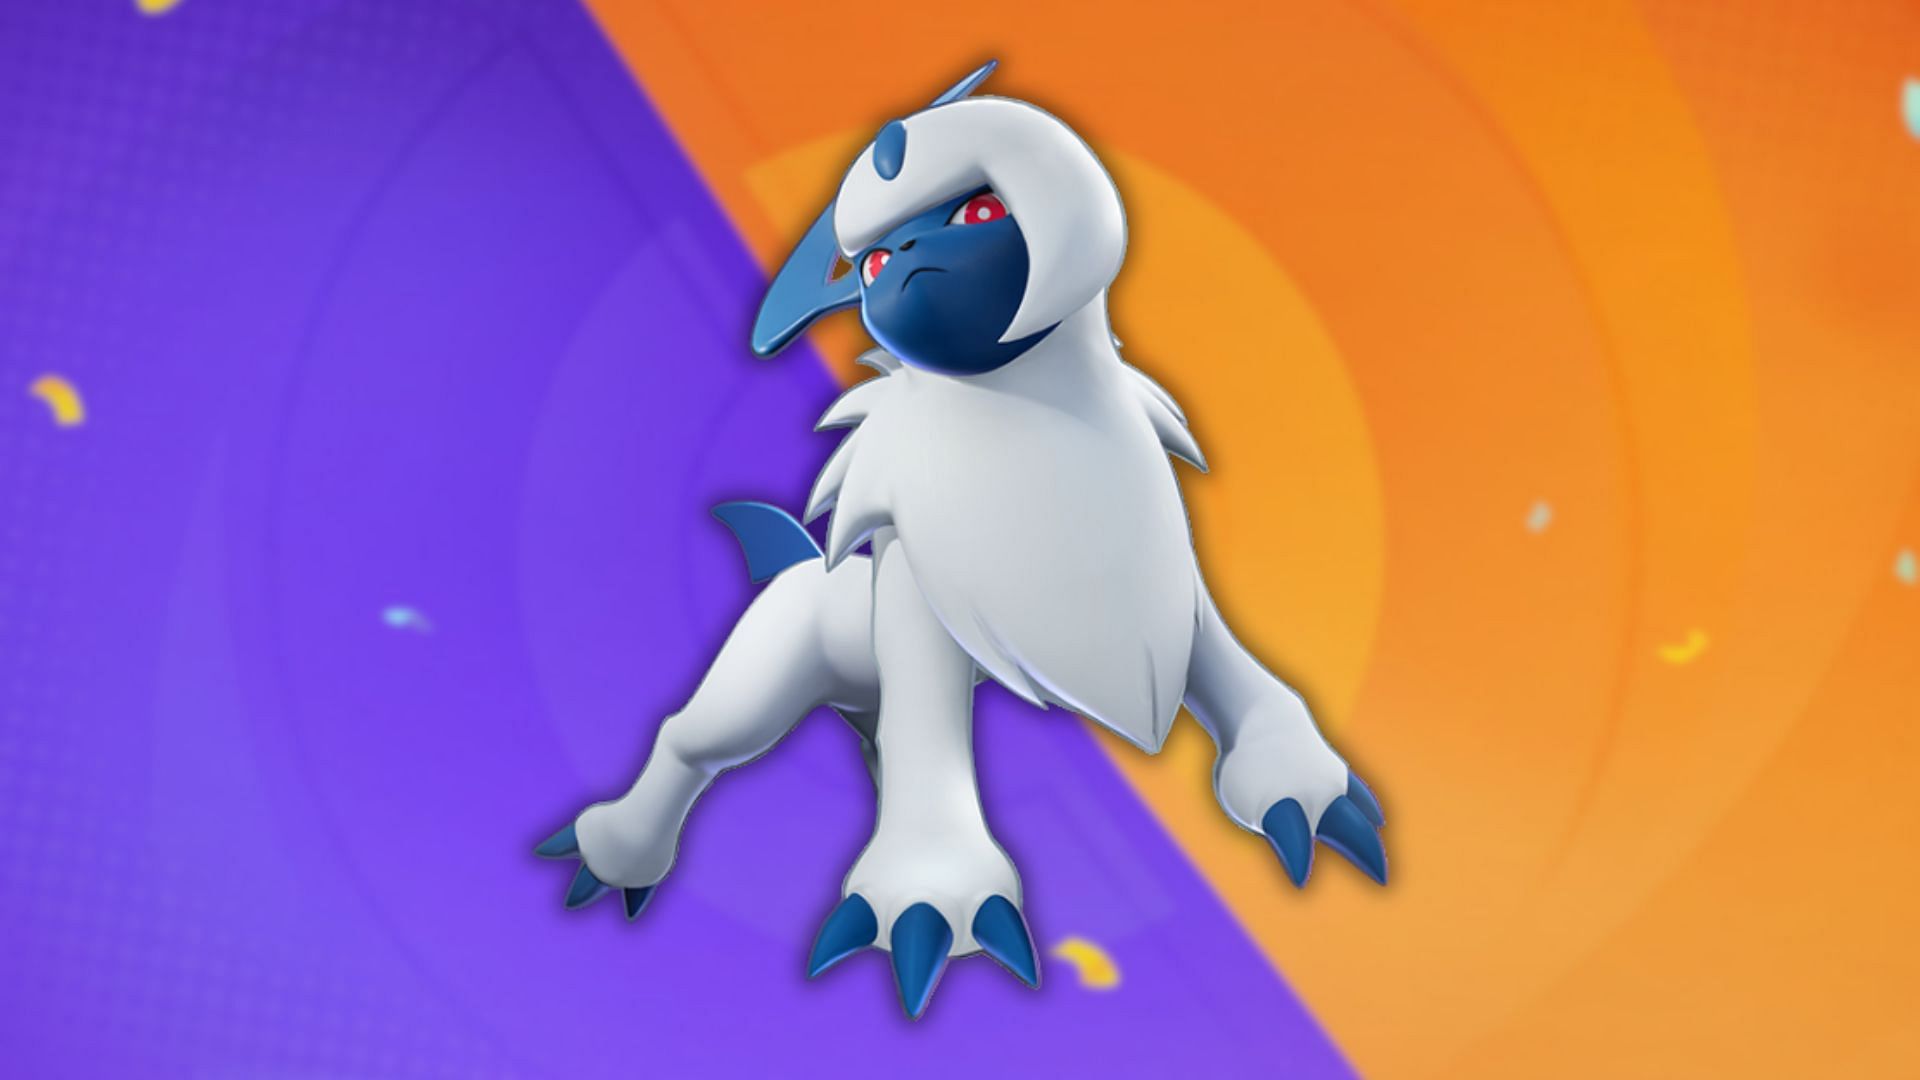 Absol in the game (Image via The Pokemon Company)